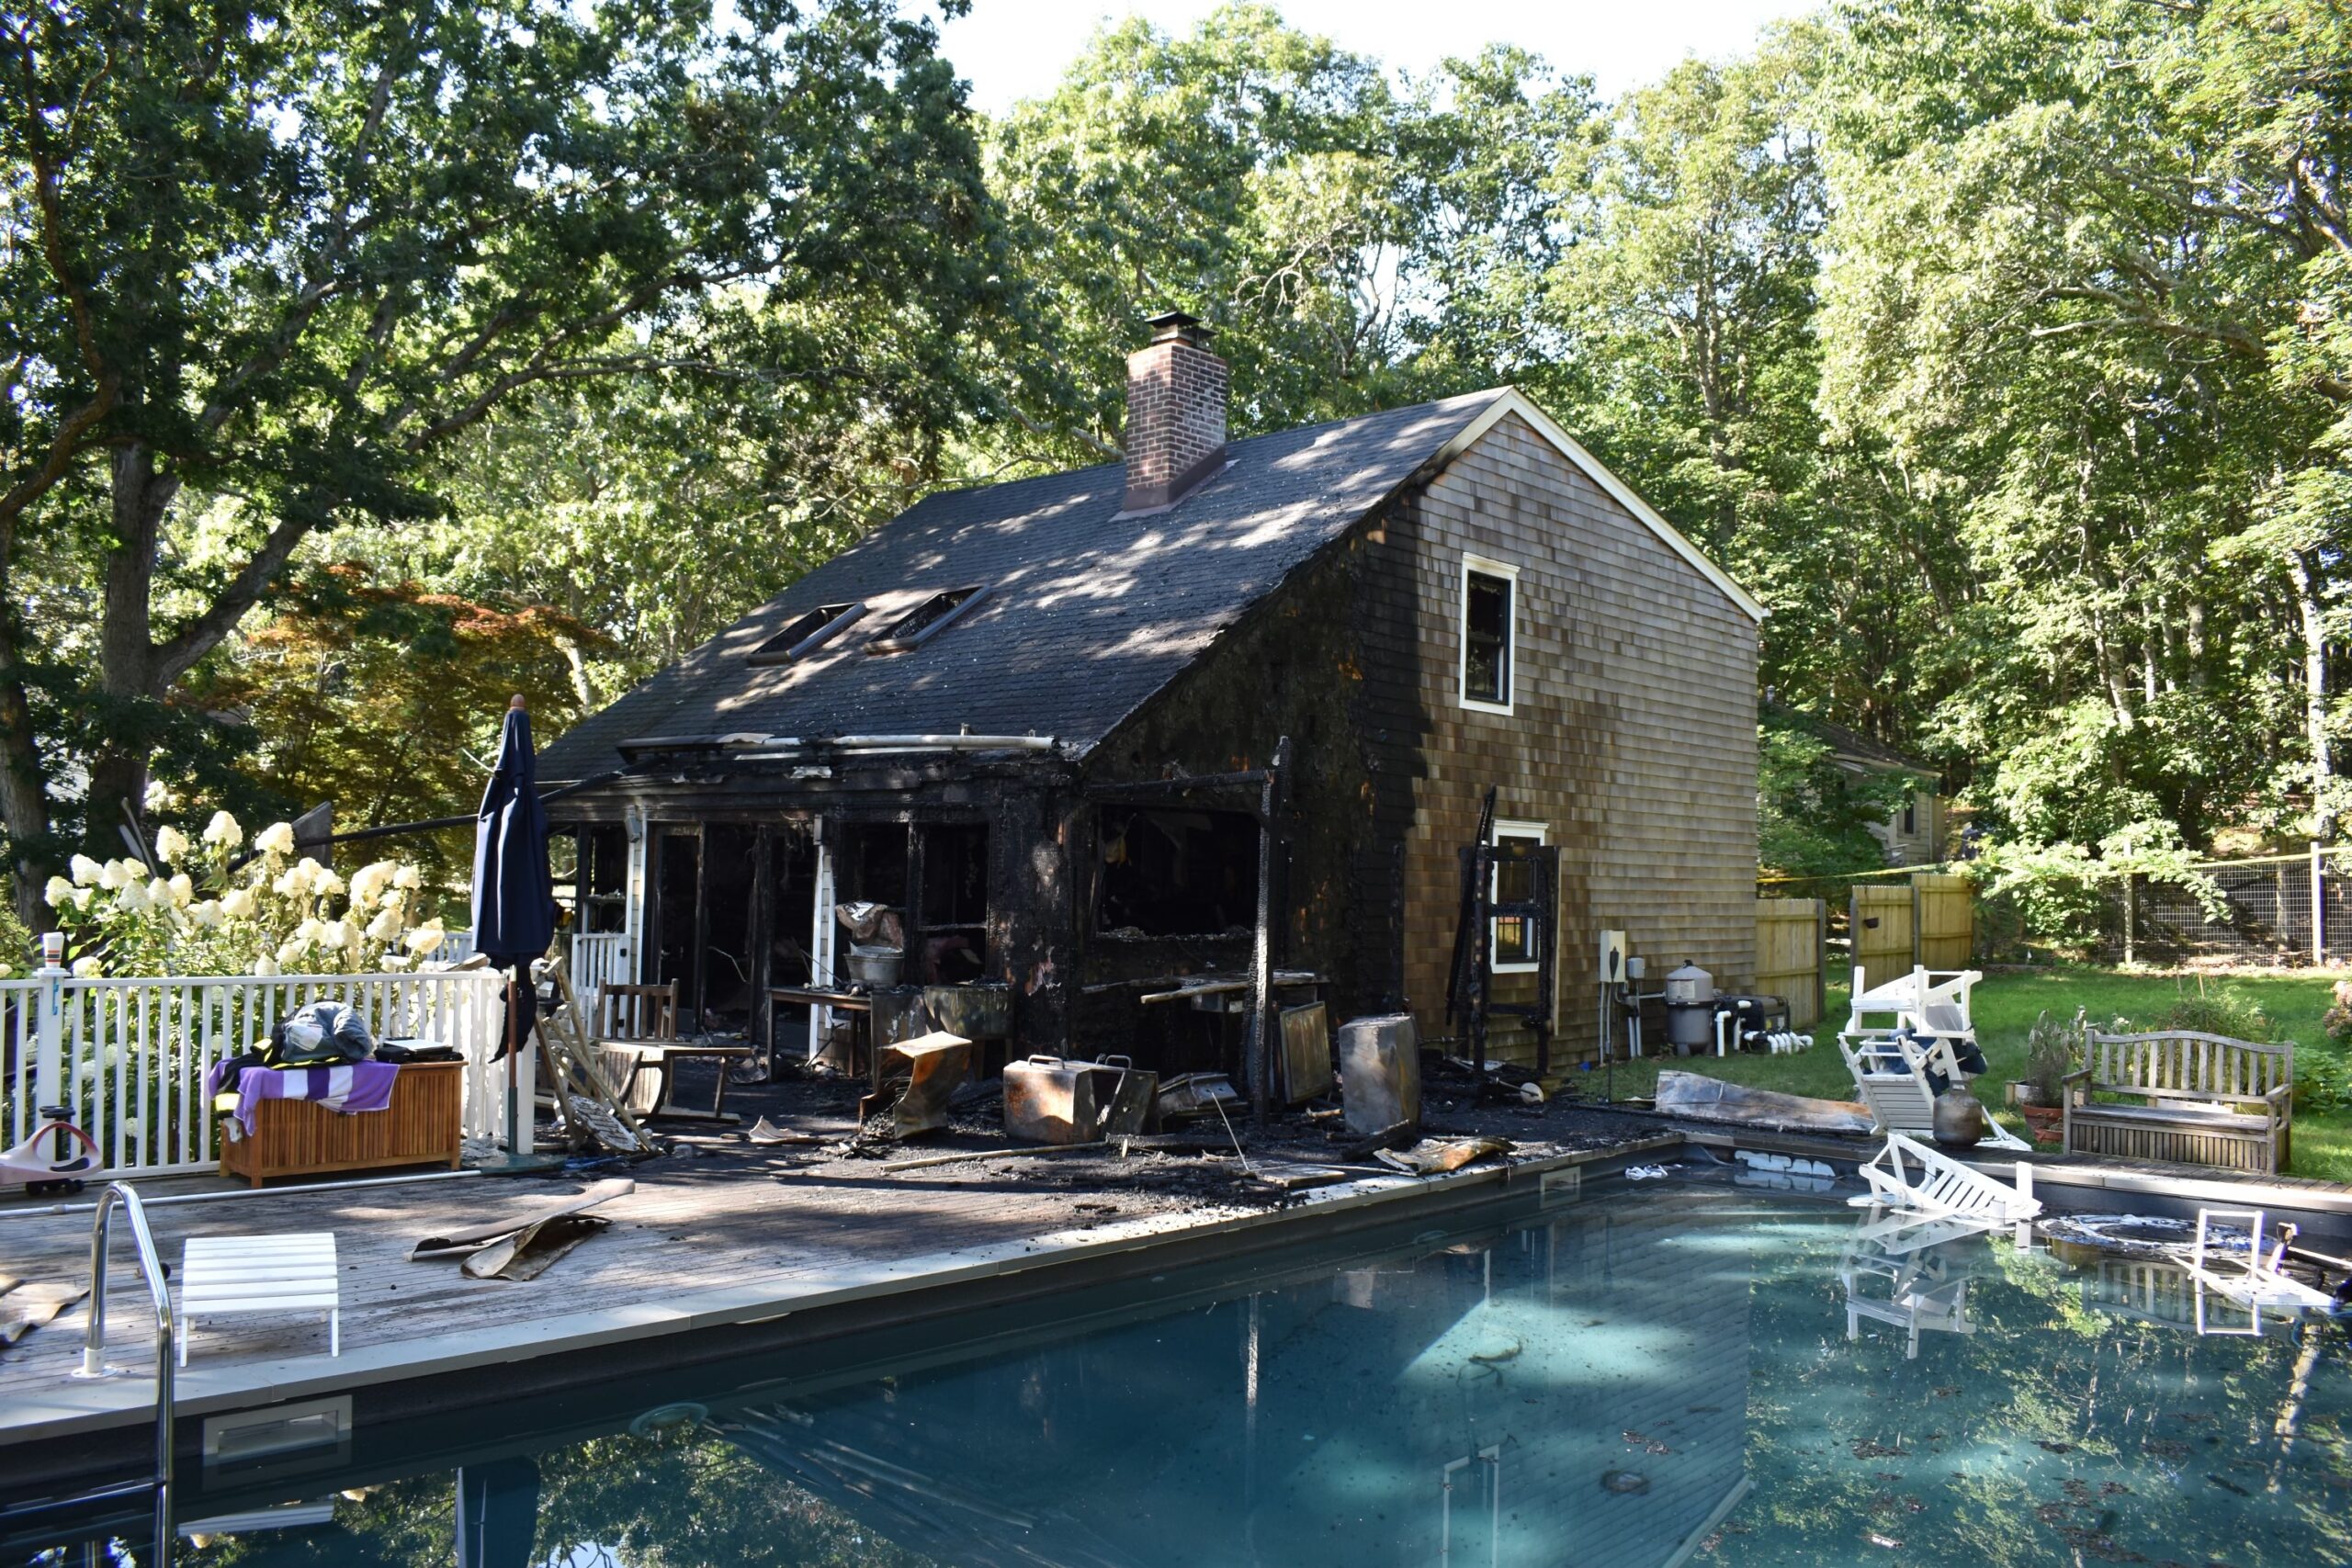 The fire that killed two Maryland sisters started near an outdoor kitchen that charges against the homeowners this week revealed was built without building permits, had not been inspected and had an improperly installed electrical outlet that investigators said posed a fire hazard.